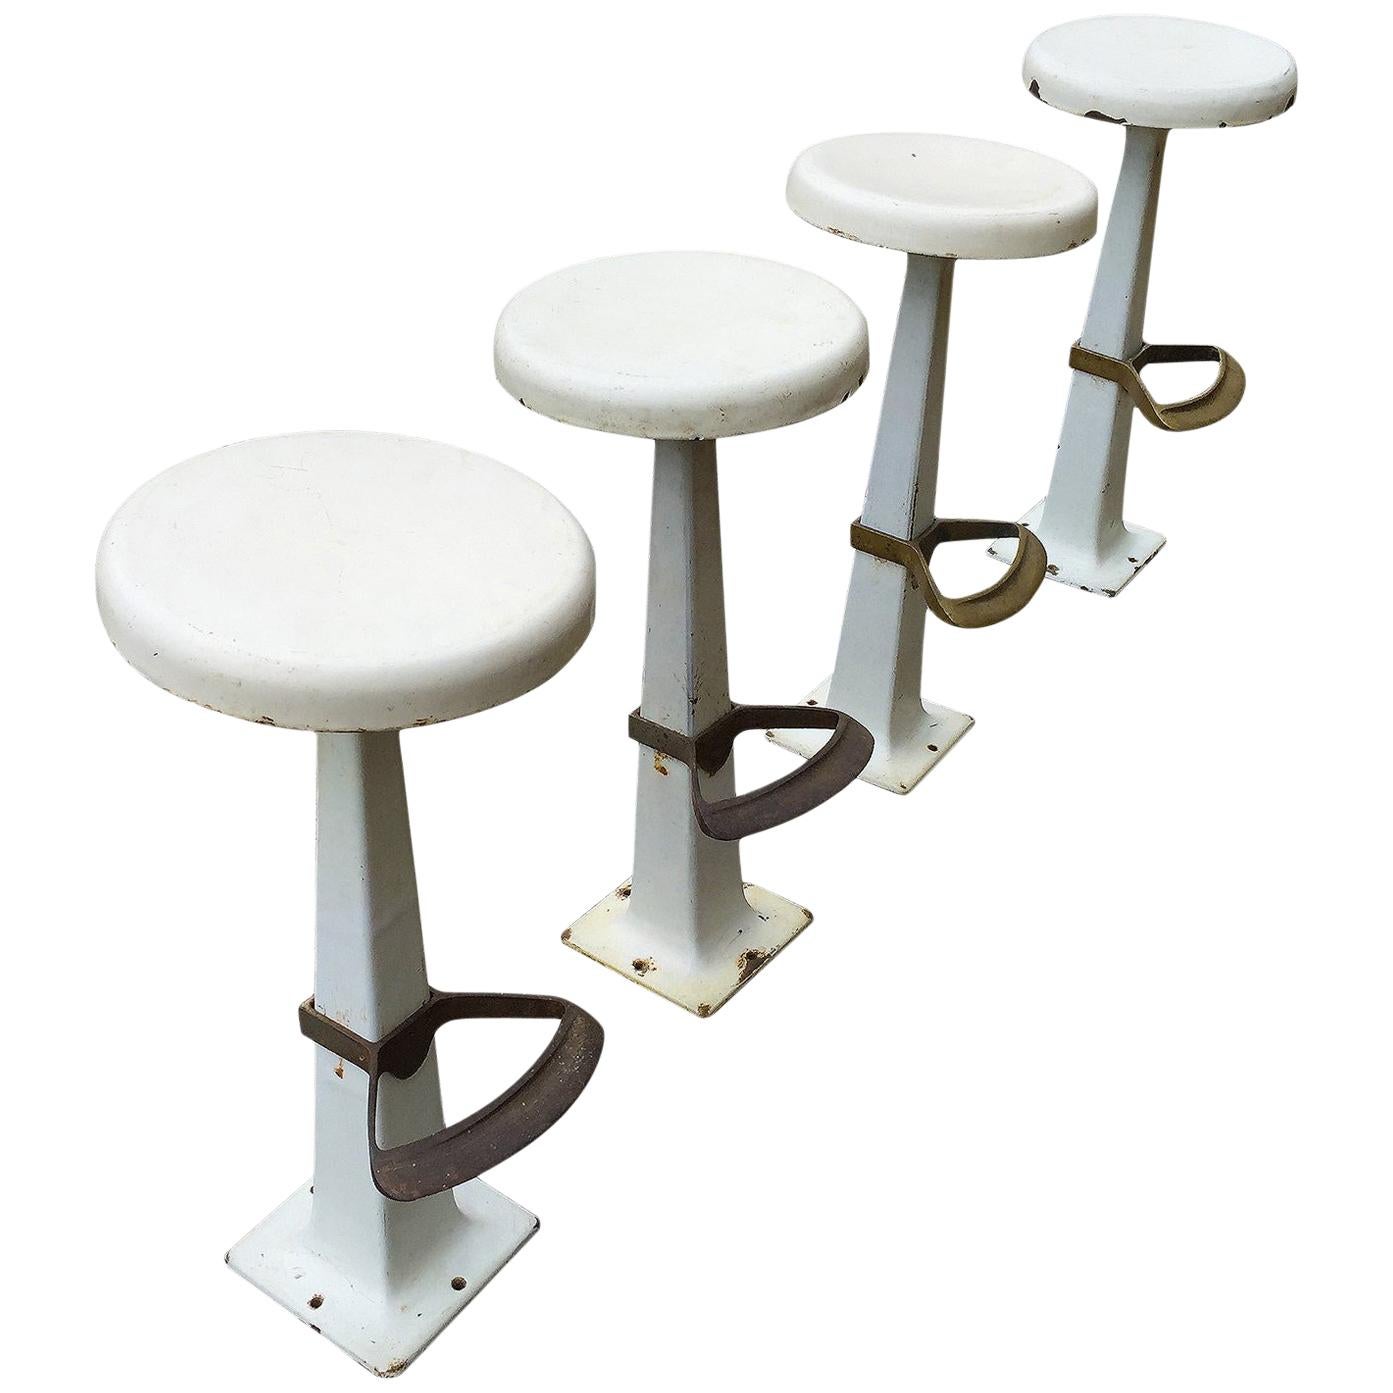 Group of Four White Stools with Footrest, circa 1930 For Sale